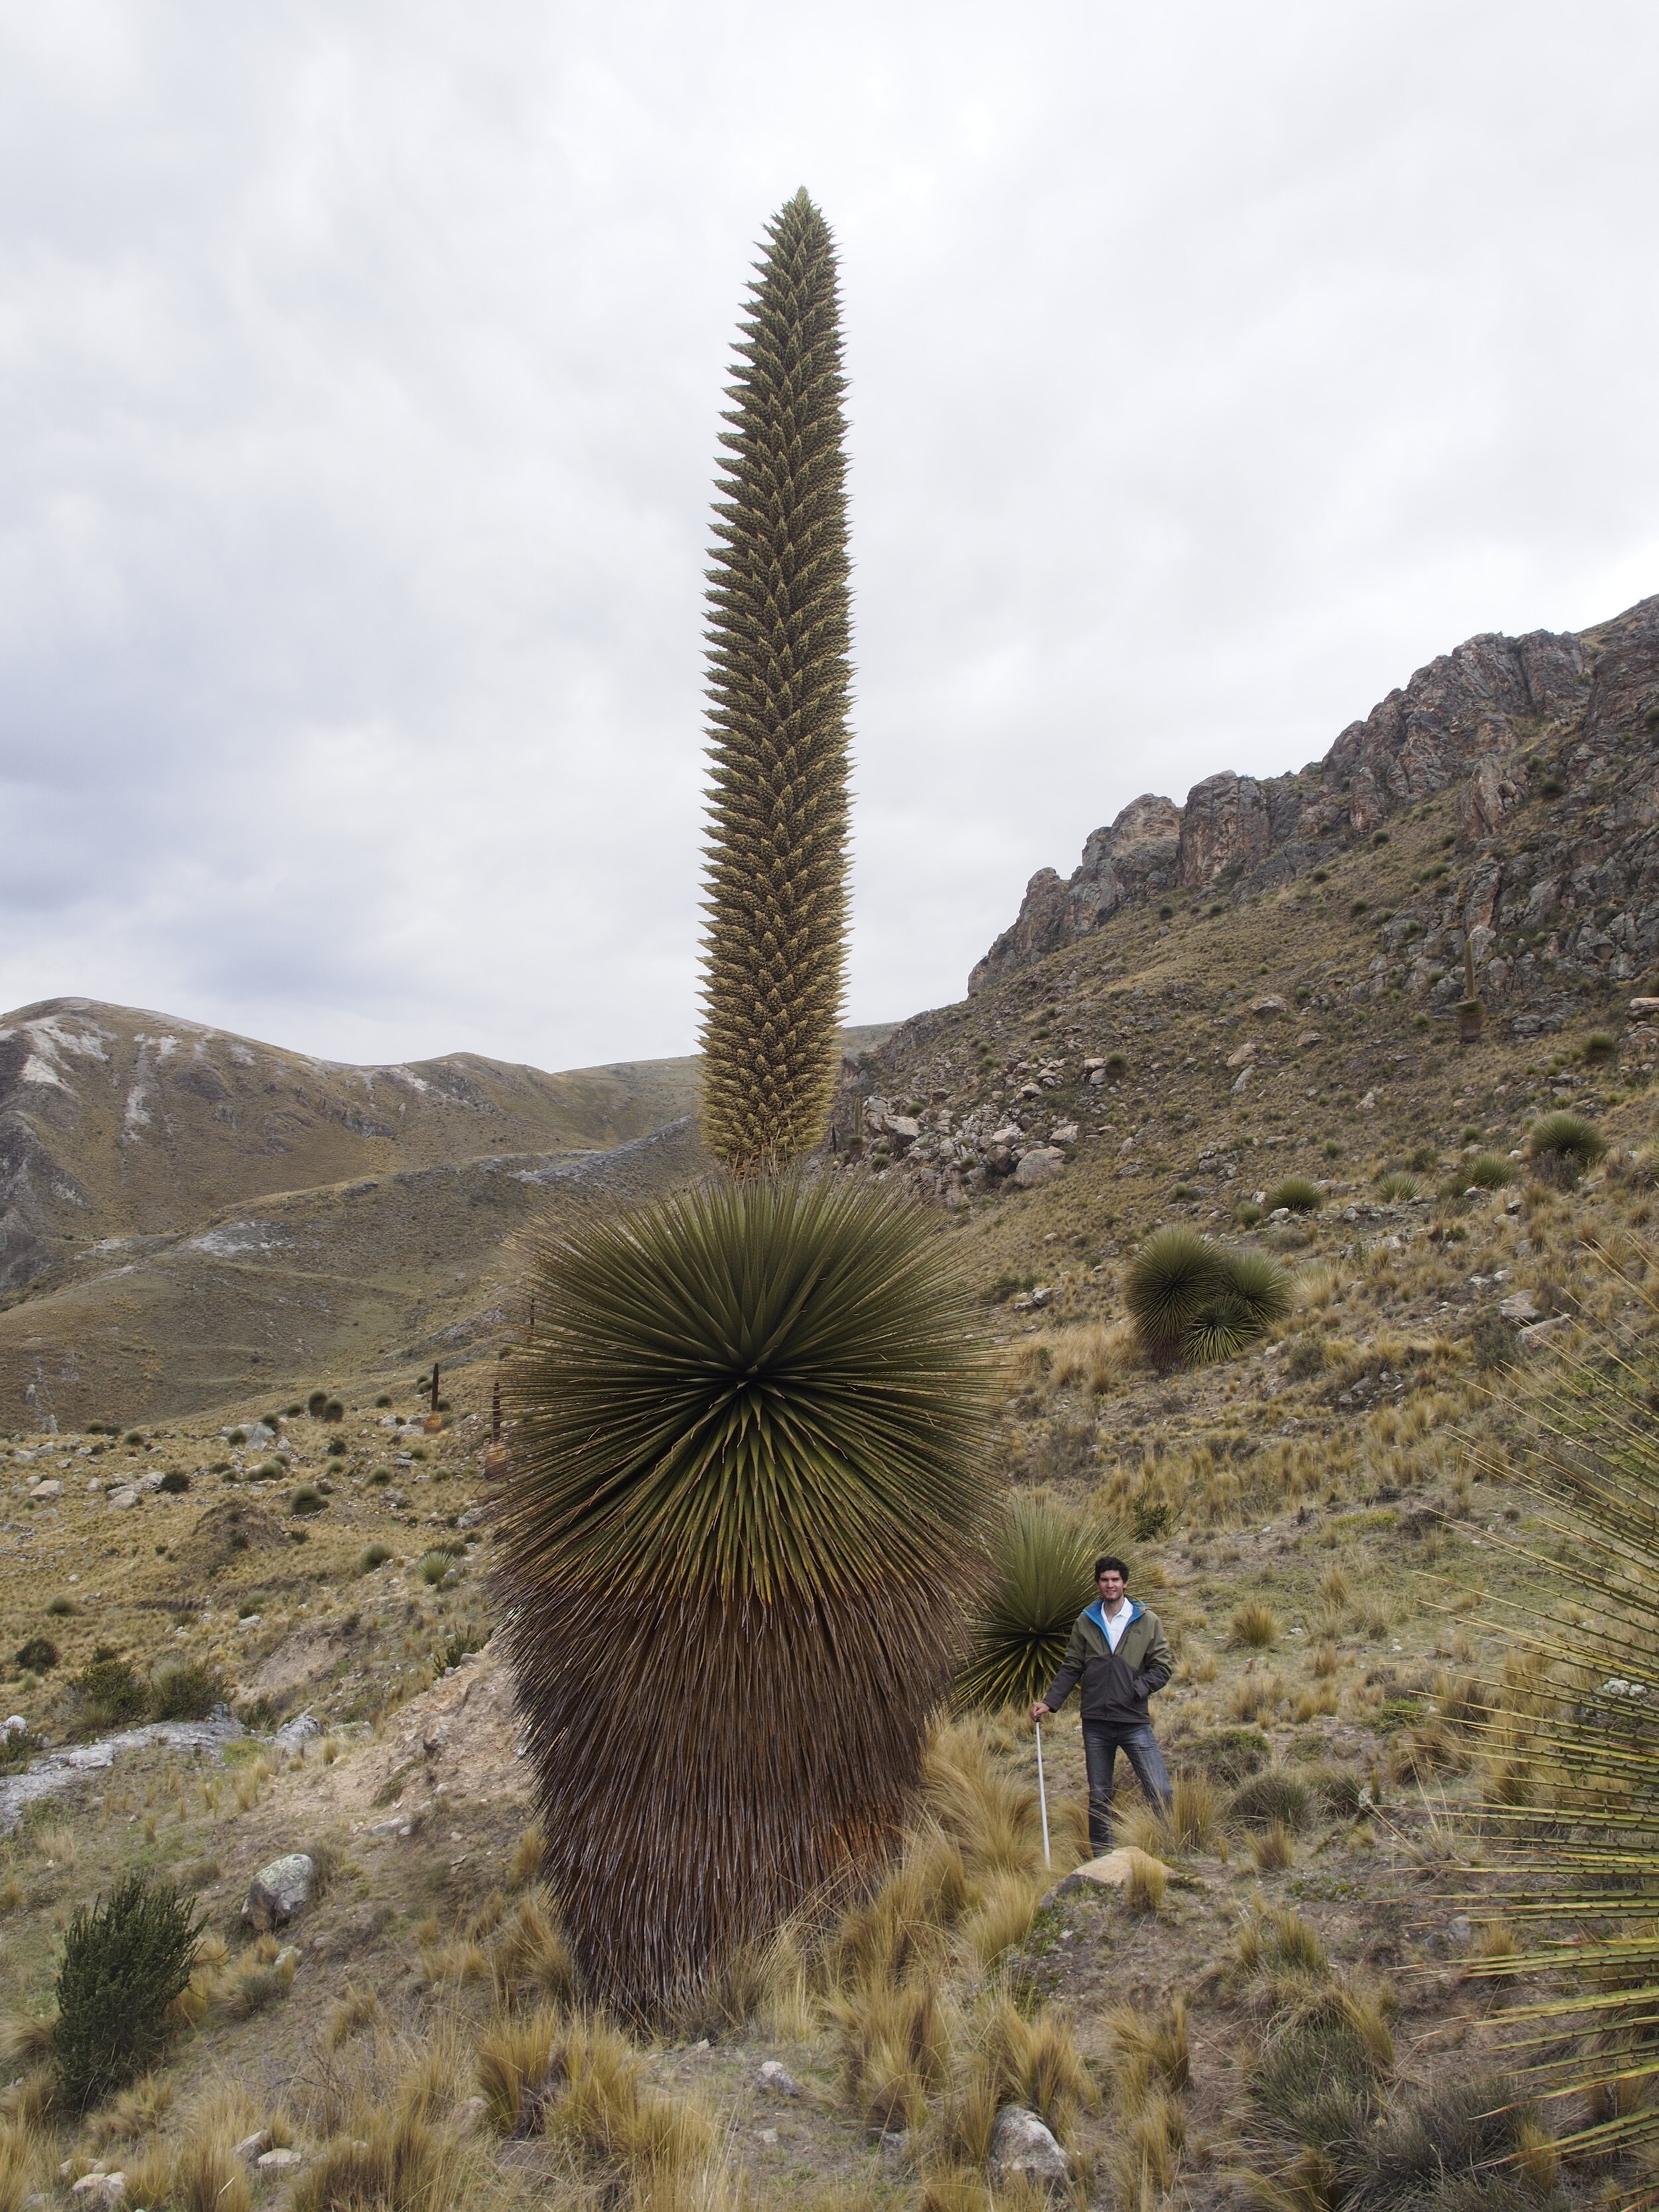  Next to a giant Puya Raimondii when travelling in Central Peru 